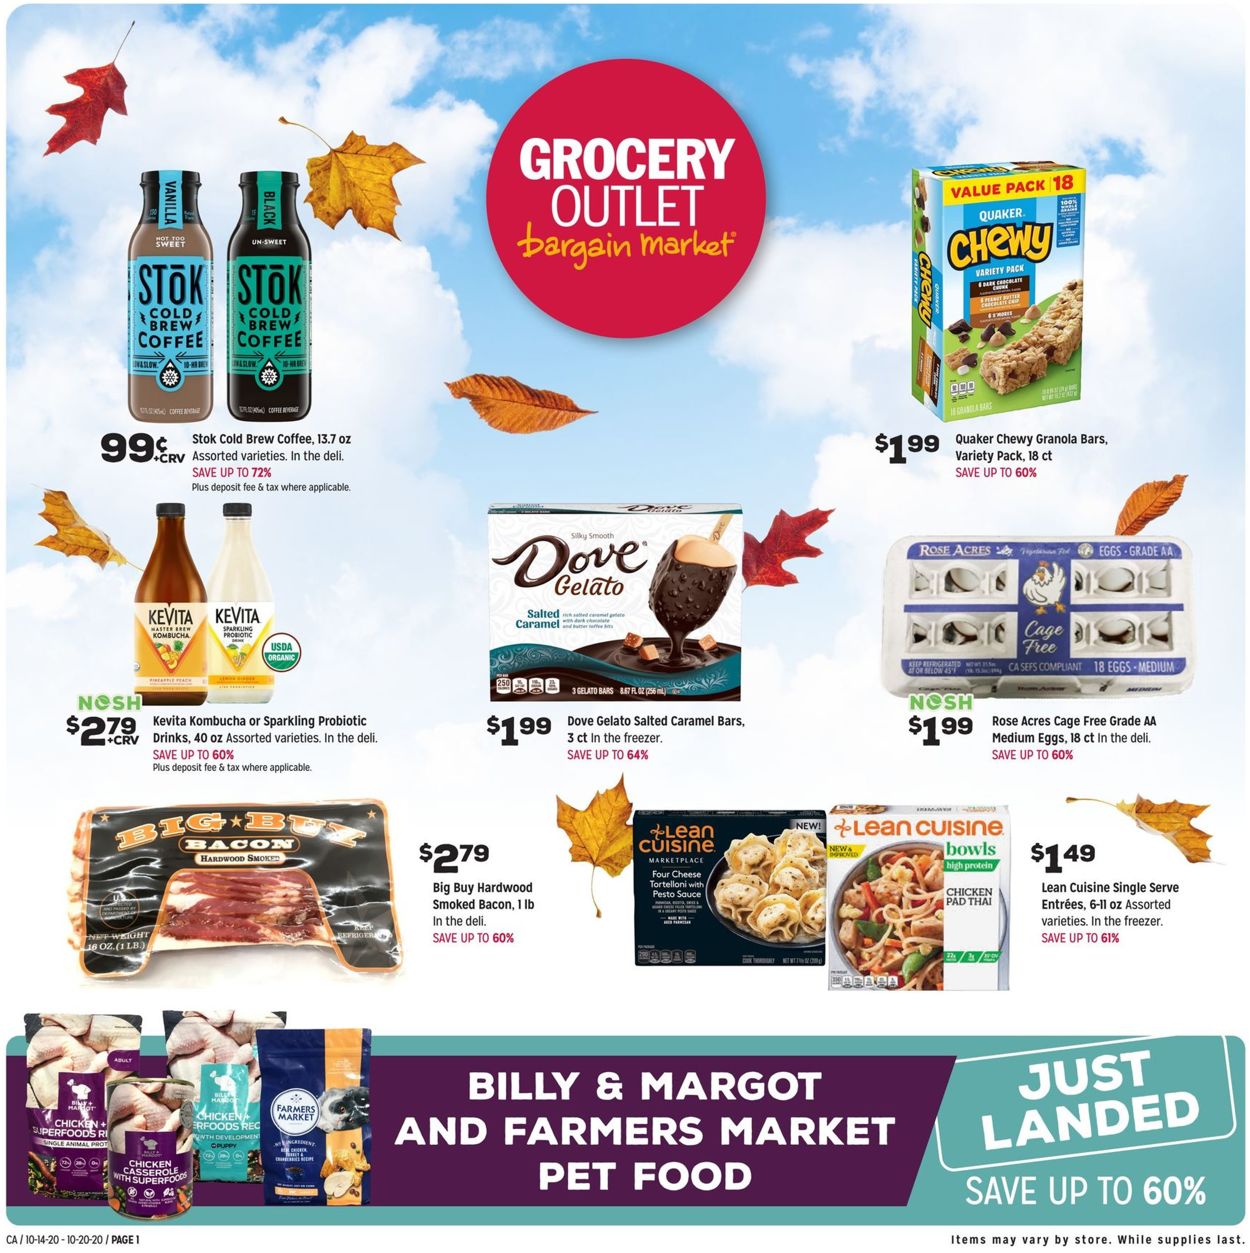 Grocery Outlet Current weekly ad 10/14 - 10/20/2020 ...